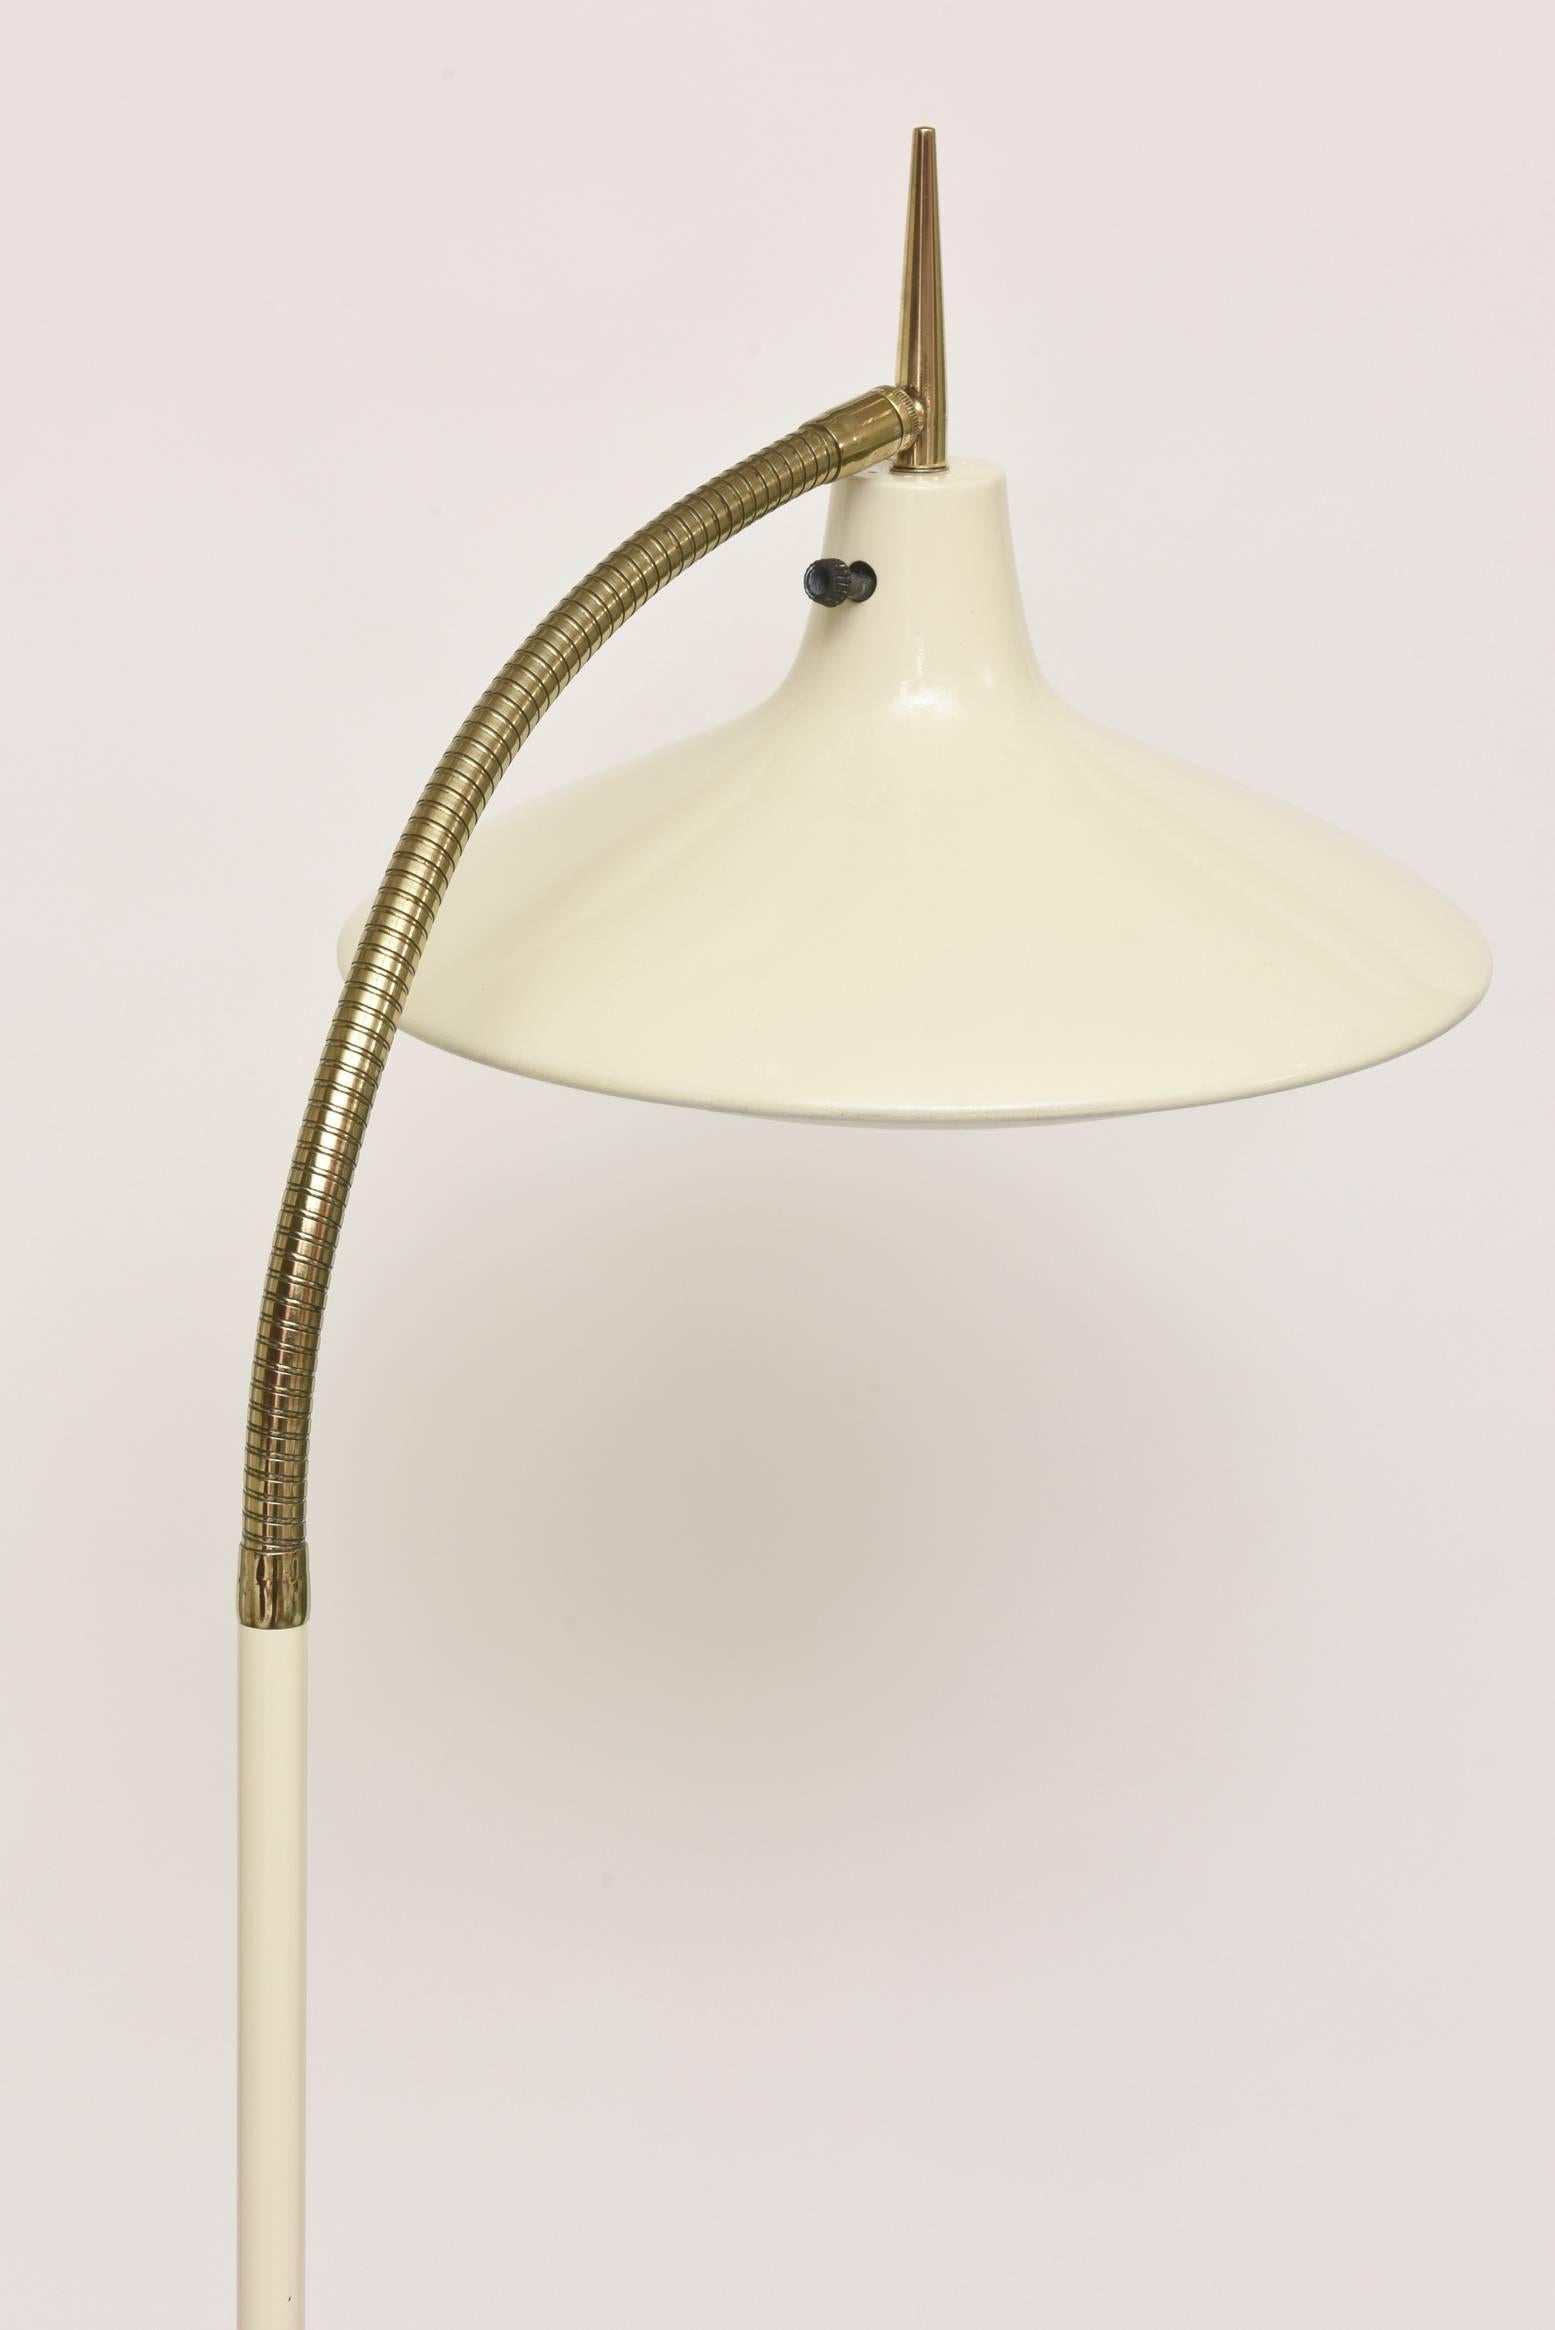 Late 20th Century Italian Gio Ponti Style Arched Floor Lamp 